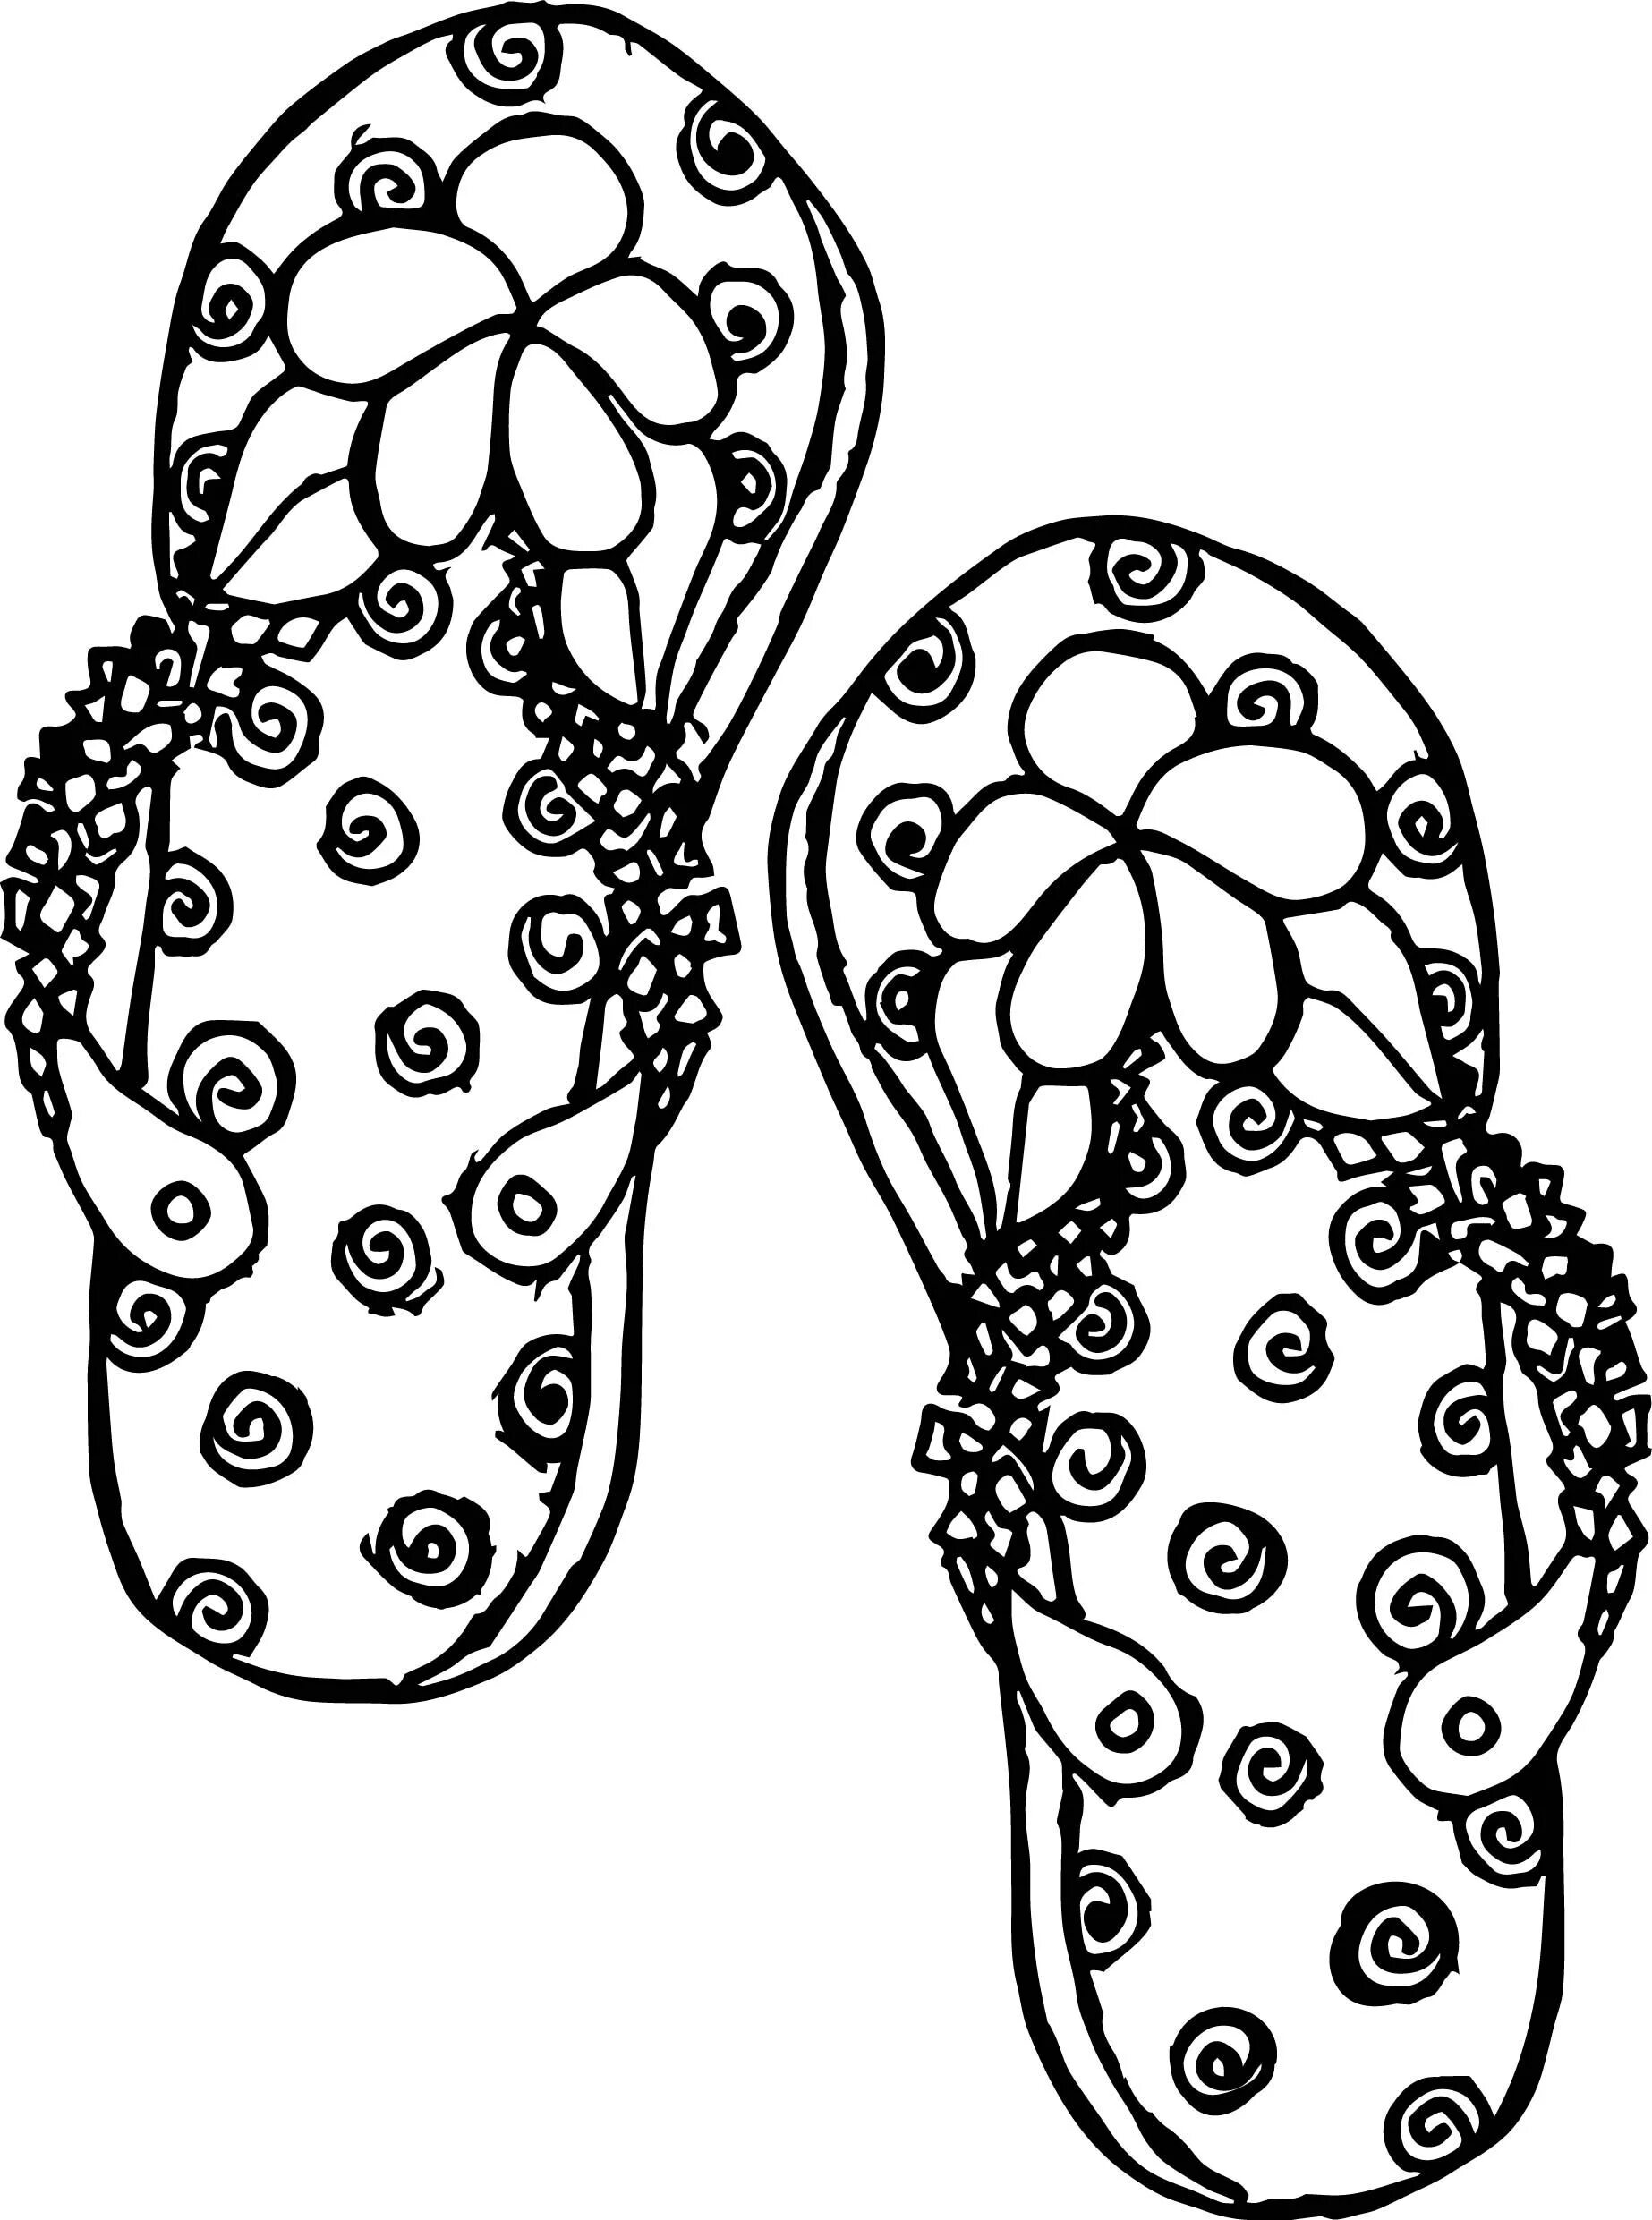 Coloring page beautiful slippers for kids